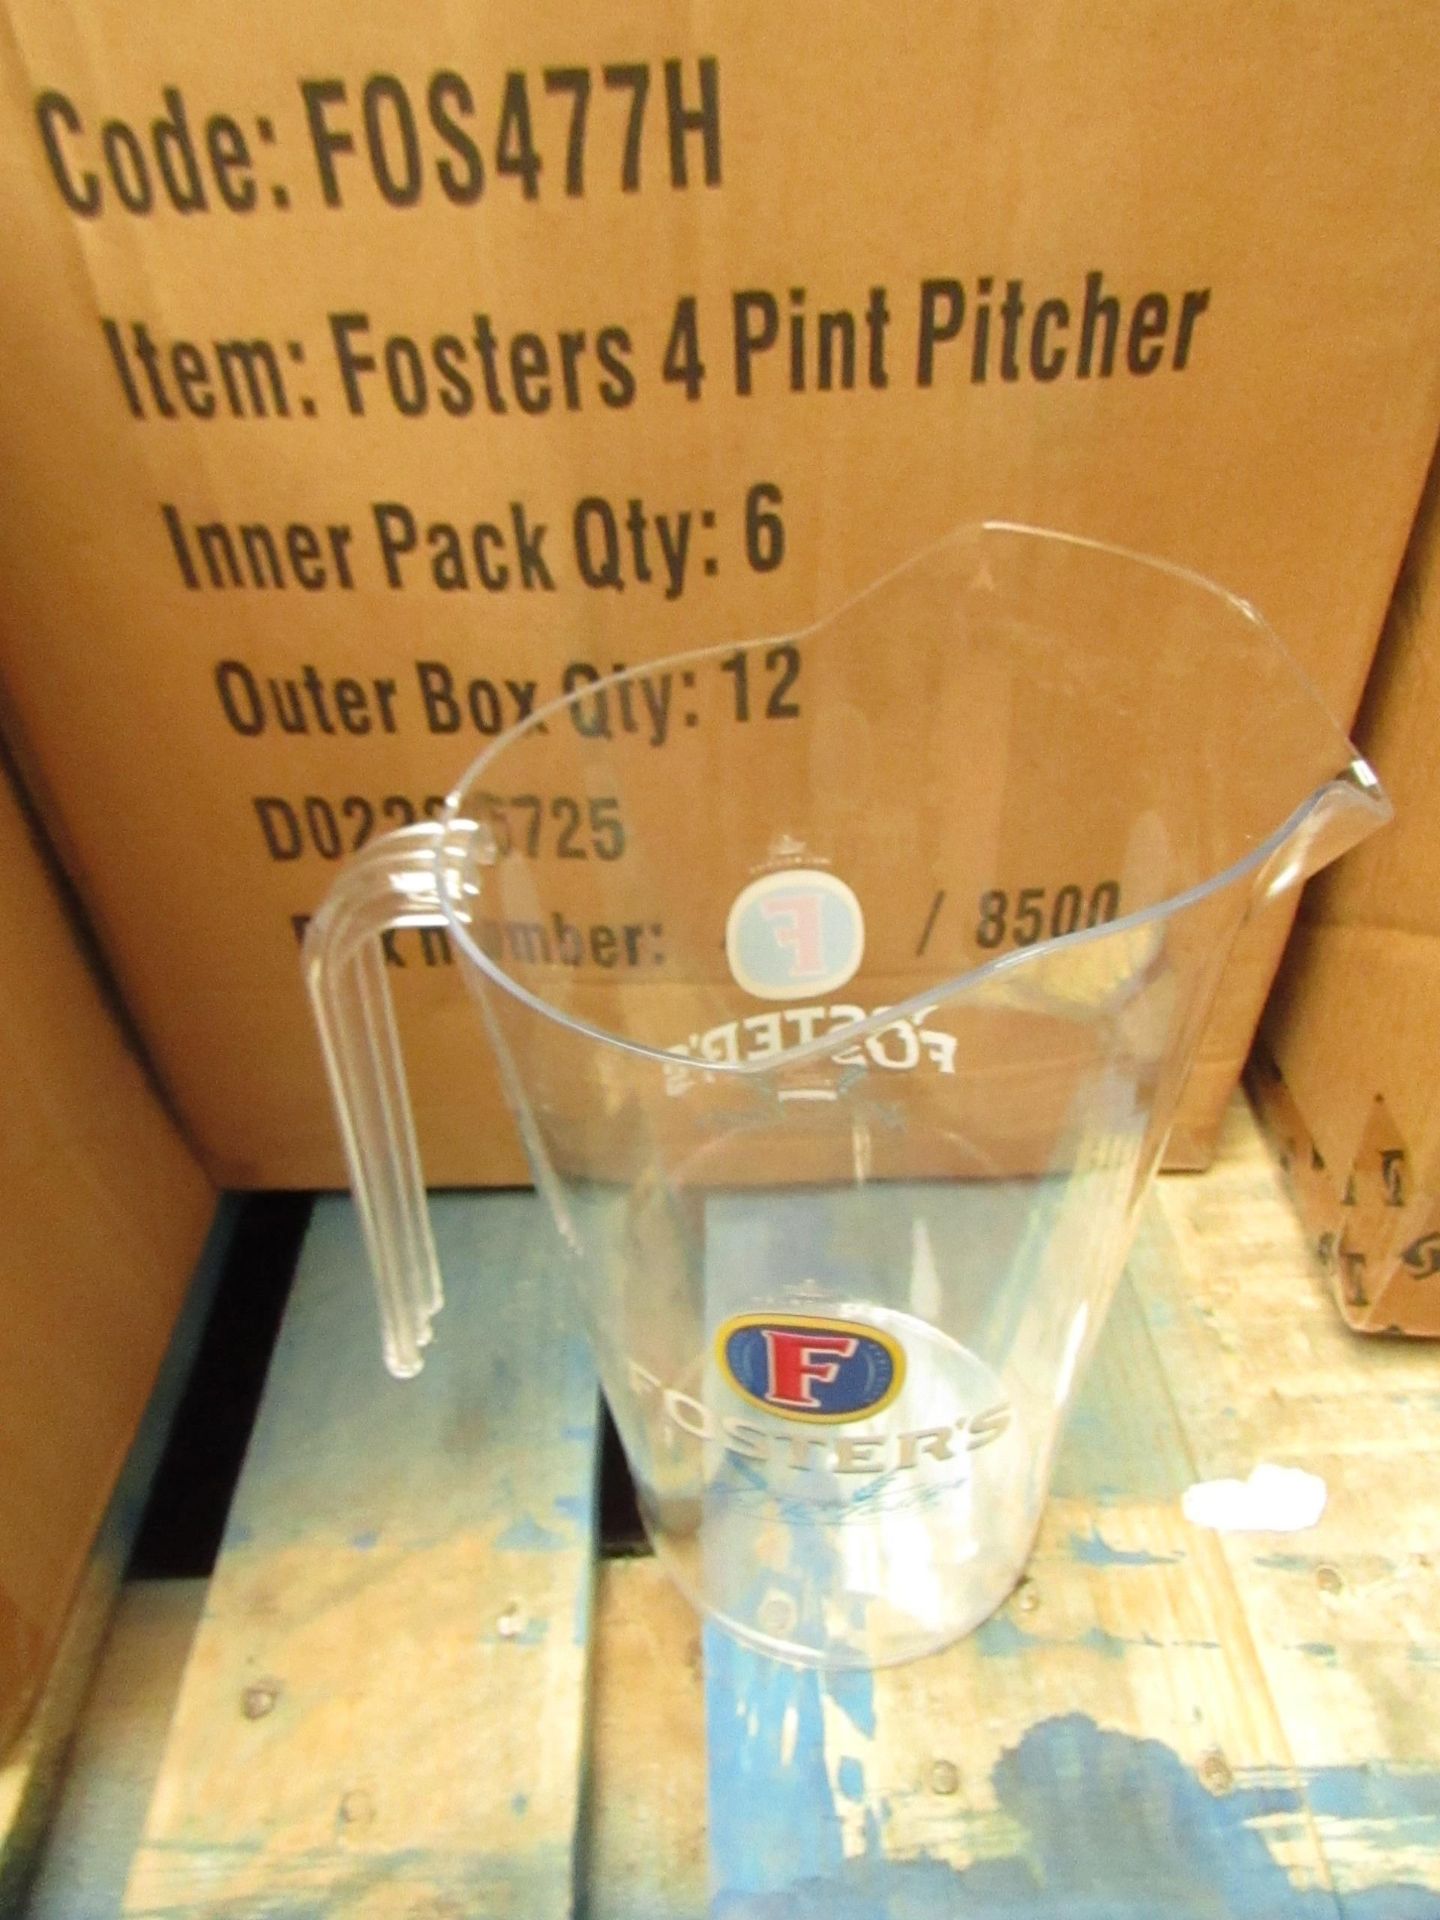 Box of 12x Foster's - 4 Pint Pitcher Jug - All Packaged and Boxed.